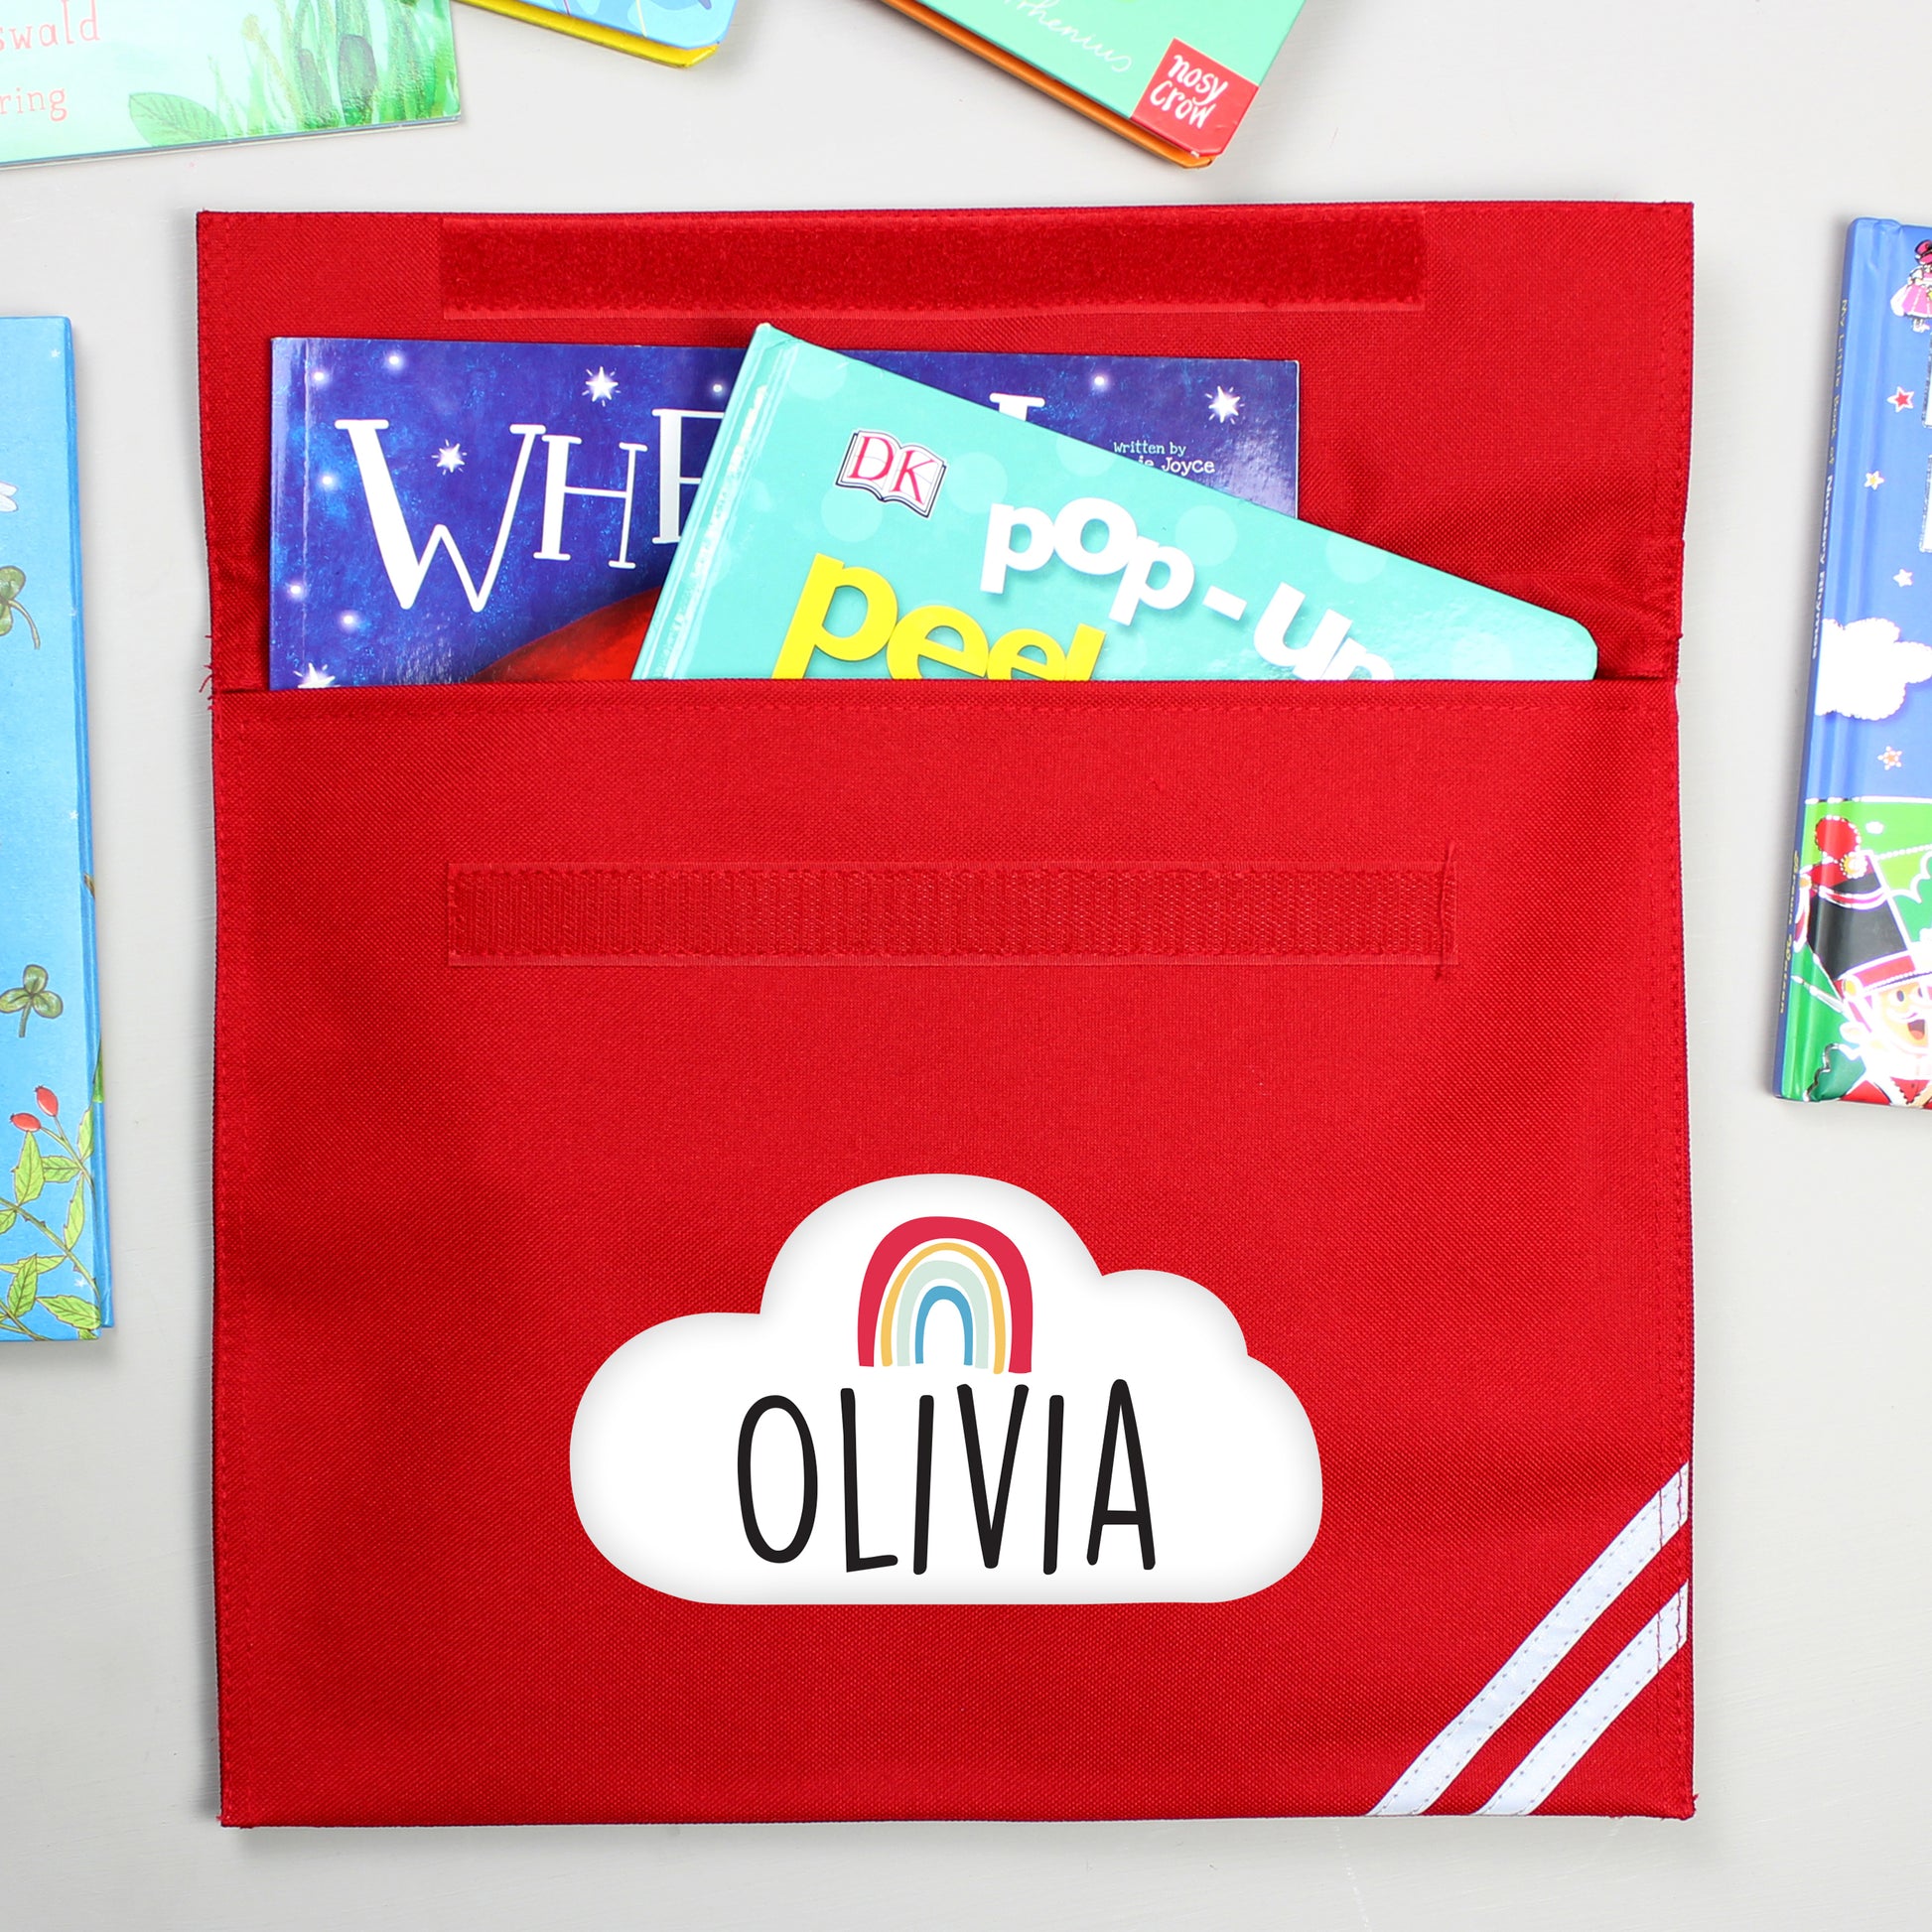 Rainbow red book bag - Lilybet loves